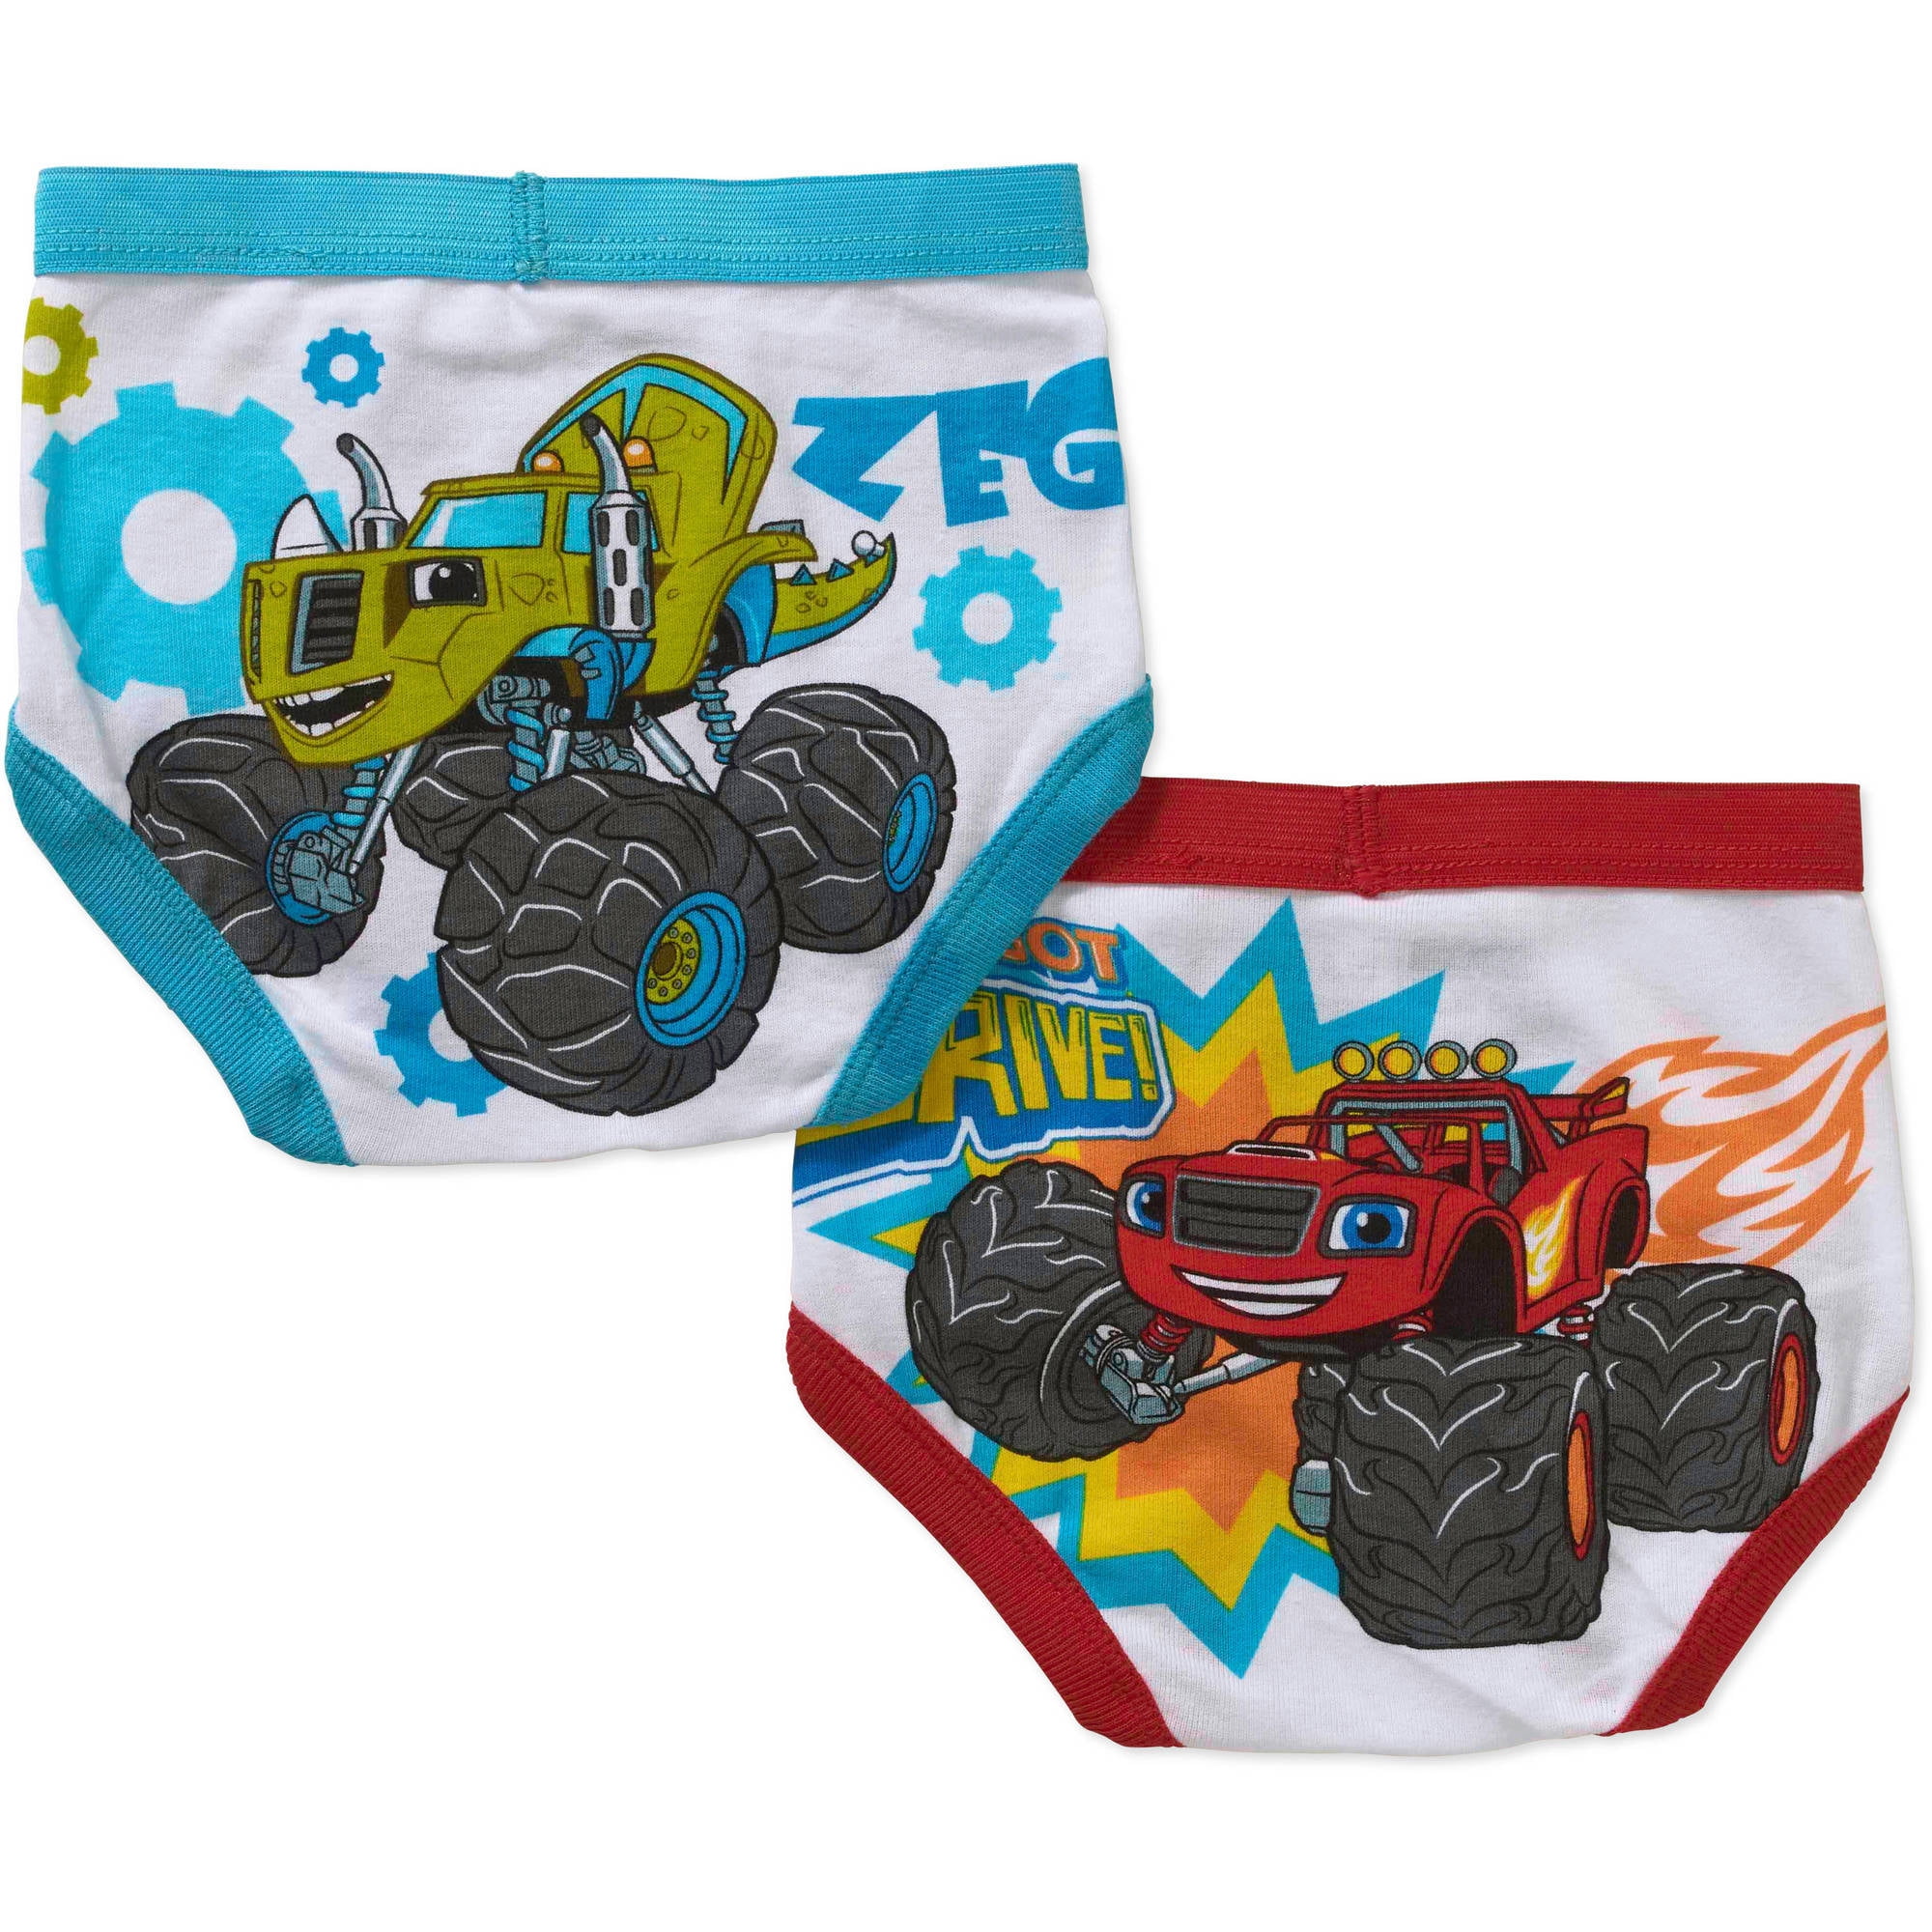 Nickelodeon Blaze and the Monster Machines Underwear, 3-Pack 100% Combed  Cotton (Toddler Boys)